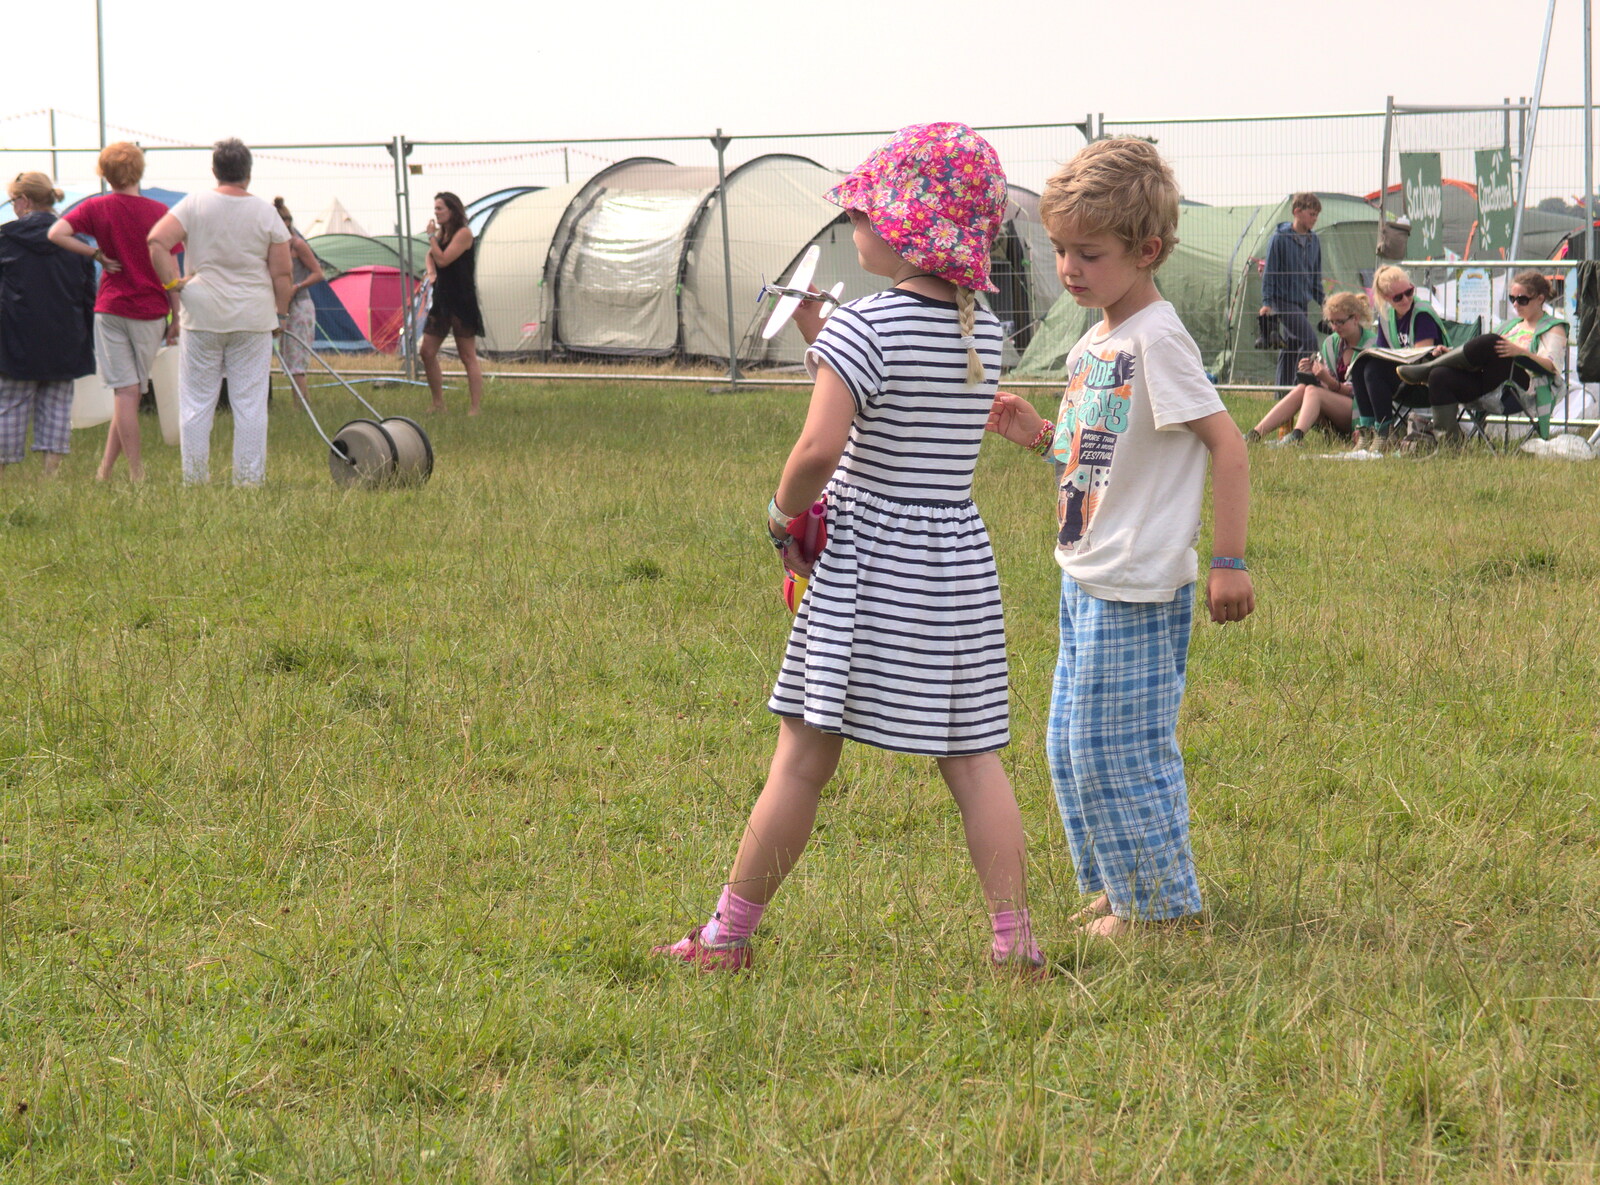 Grace and Fred from Latitude Festival, Henham Park, Southwold, Suffolk - 17th July 2014